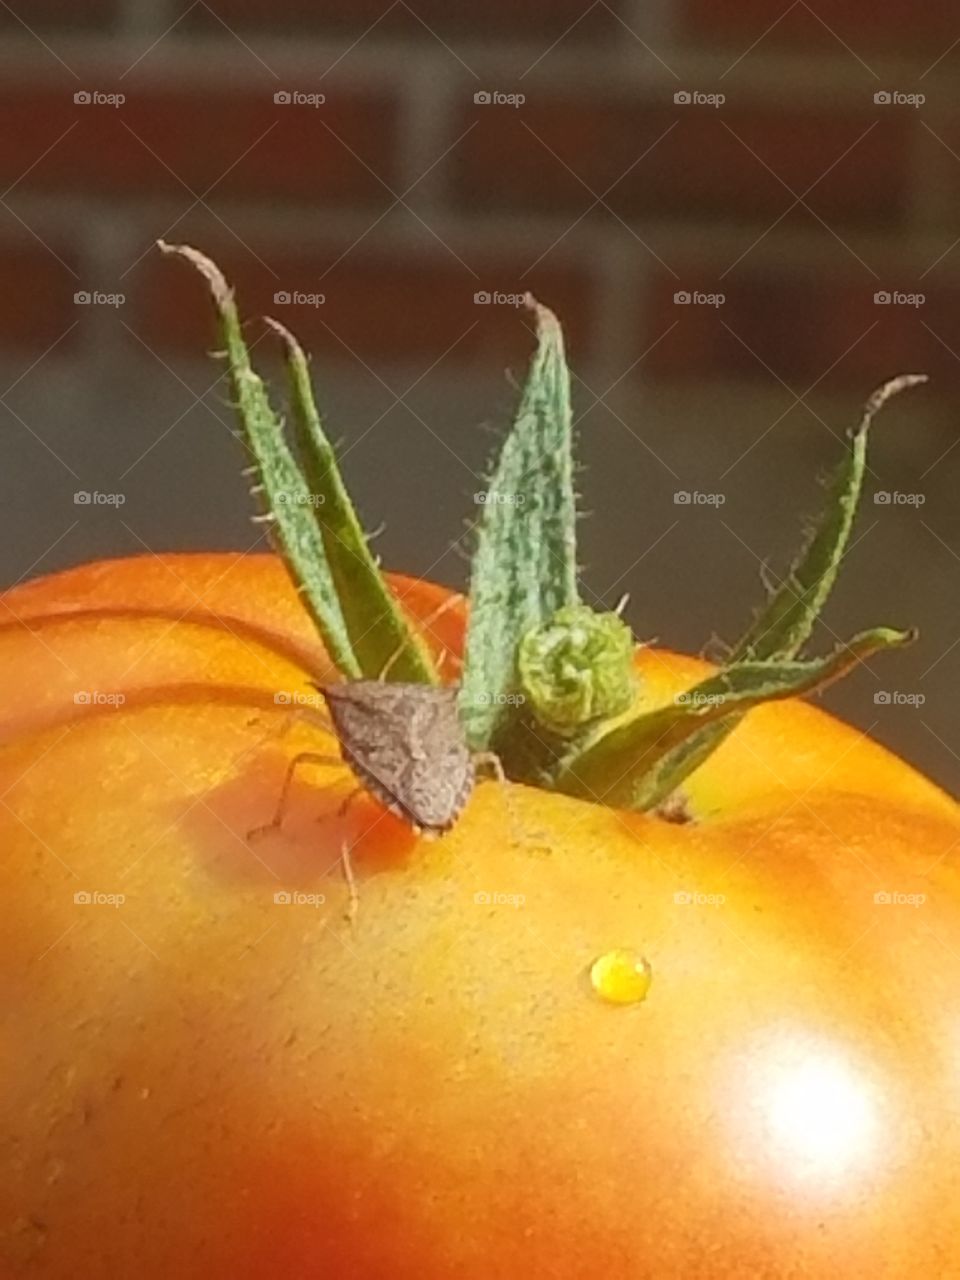 A little stinkbug decided to hitchhike on our tomato! #God'sArt #GloryToTheMostHigh